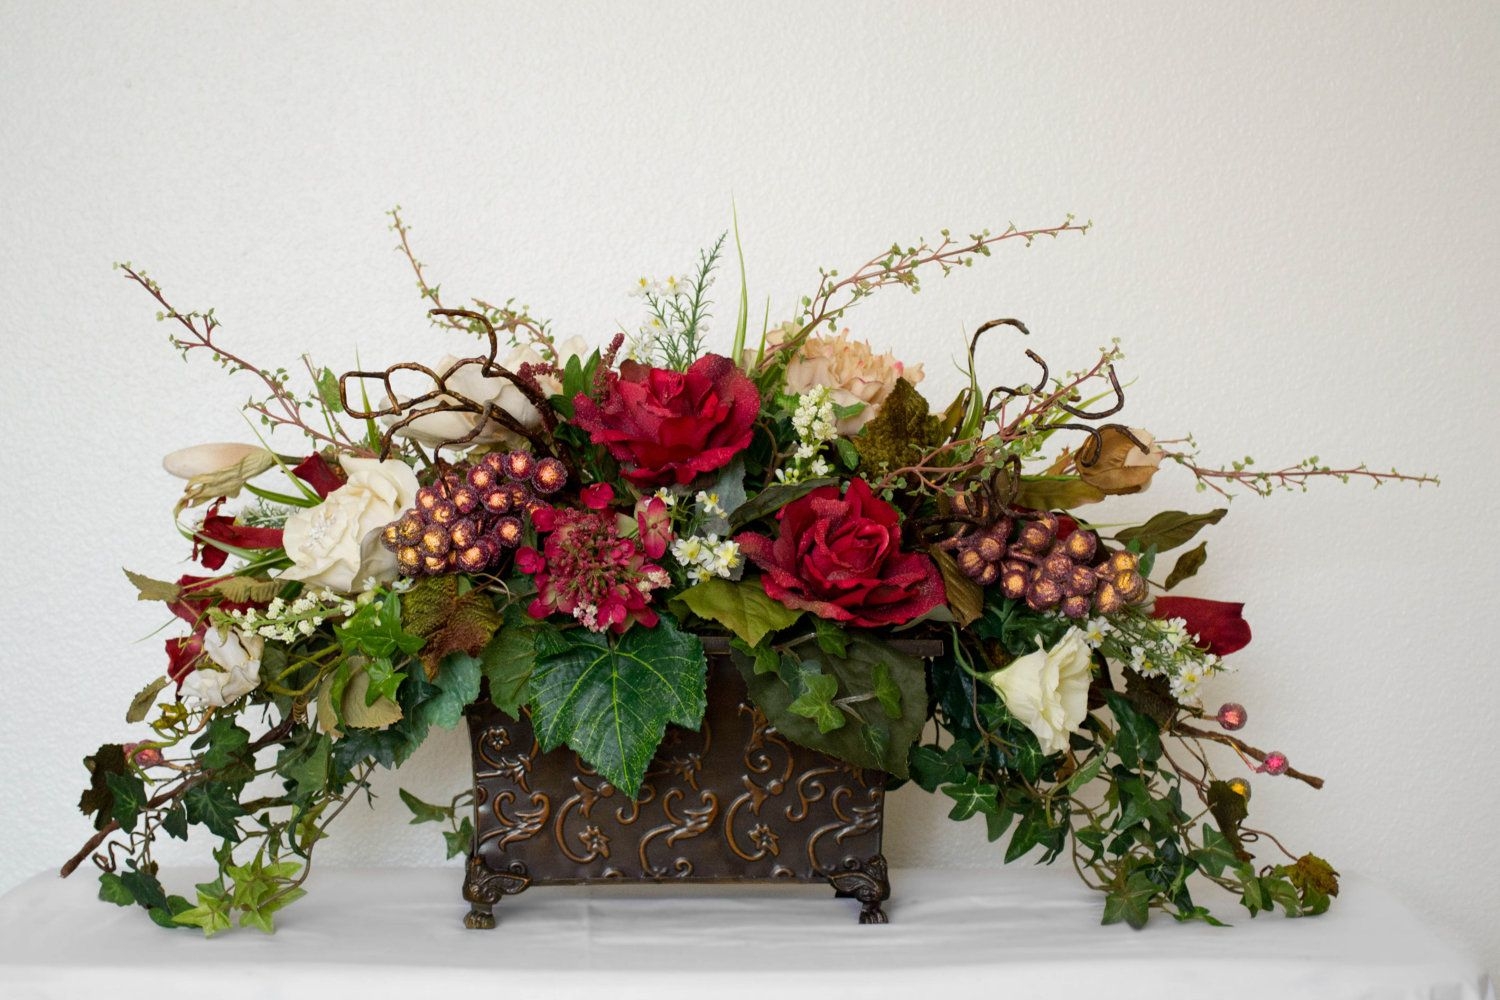 Silk floral arrangements with roses and